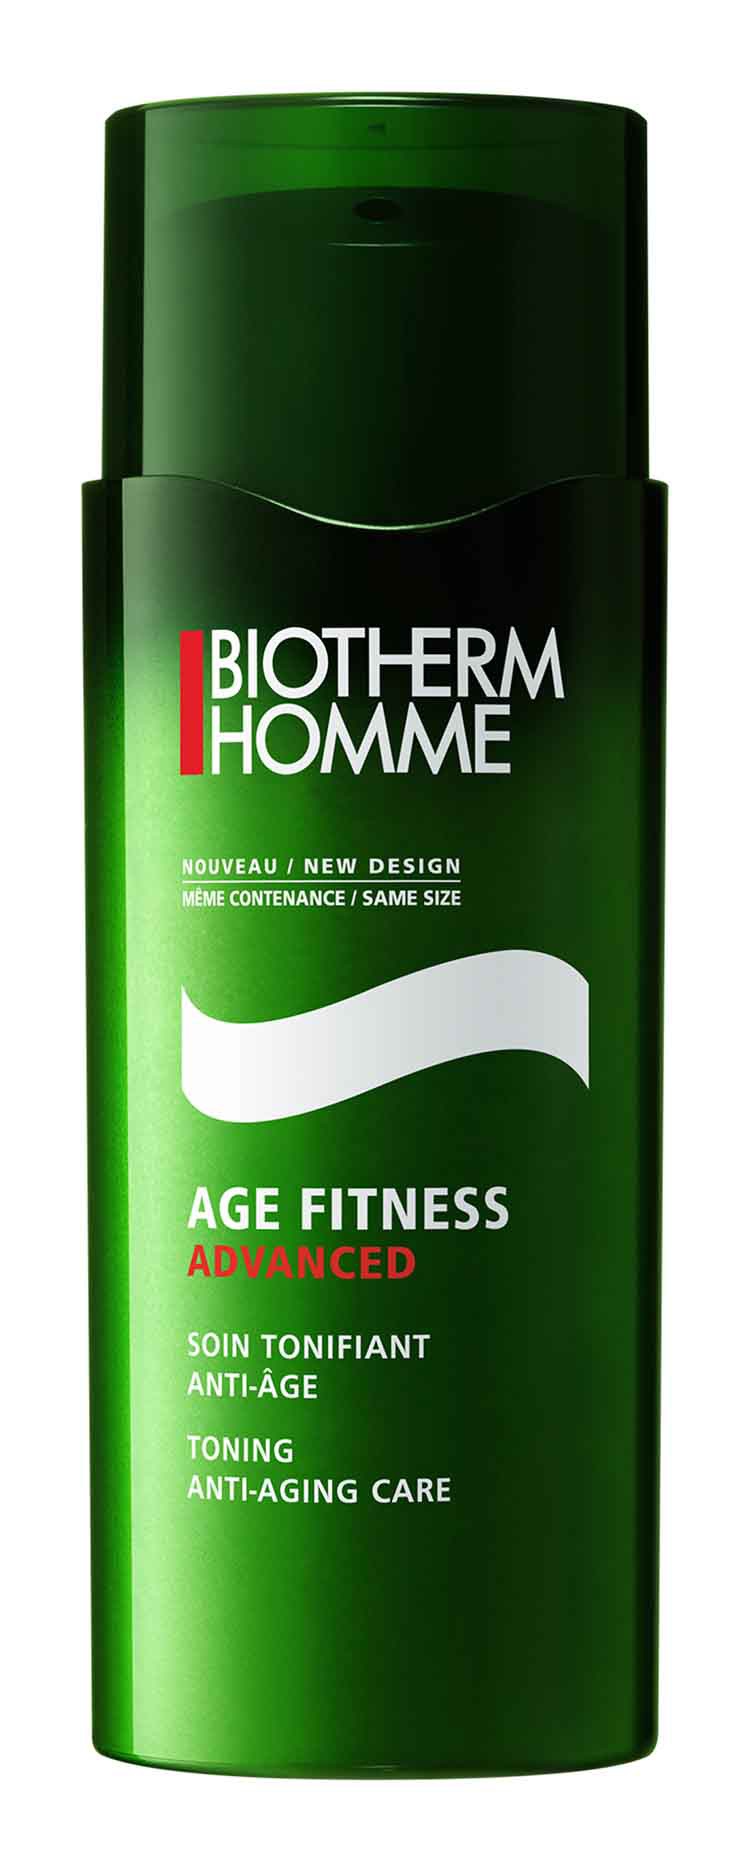 Biotherm Homme Age Fitness Day Moisturizer